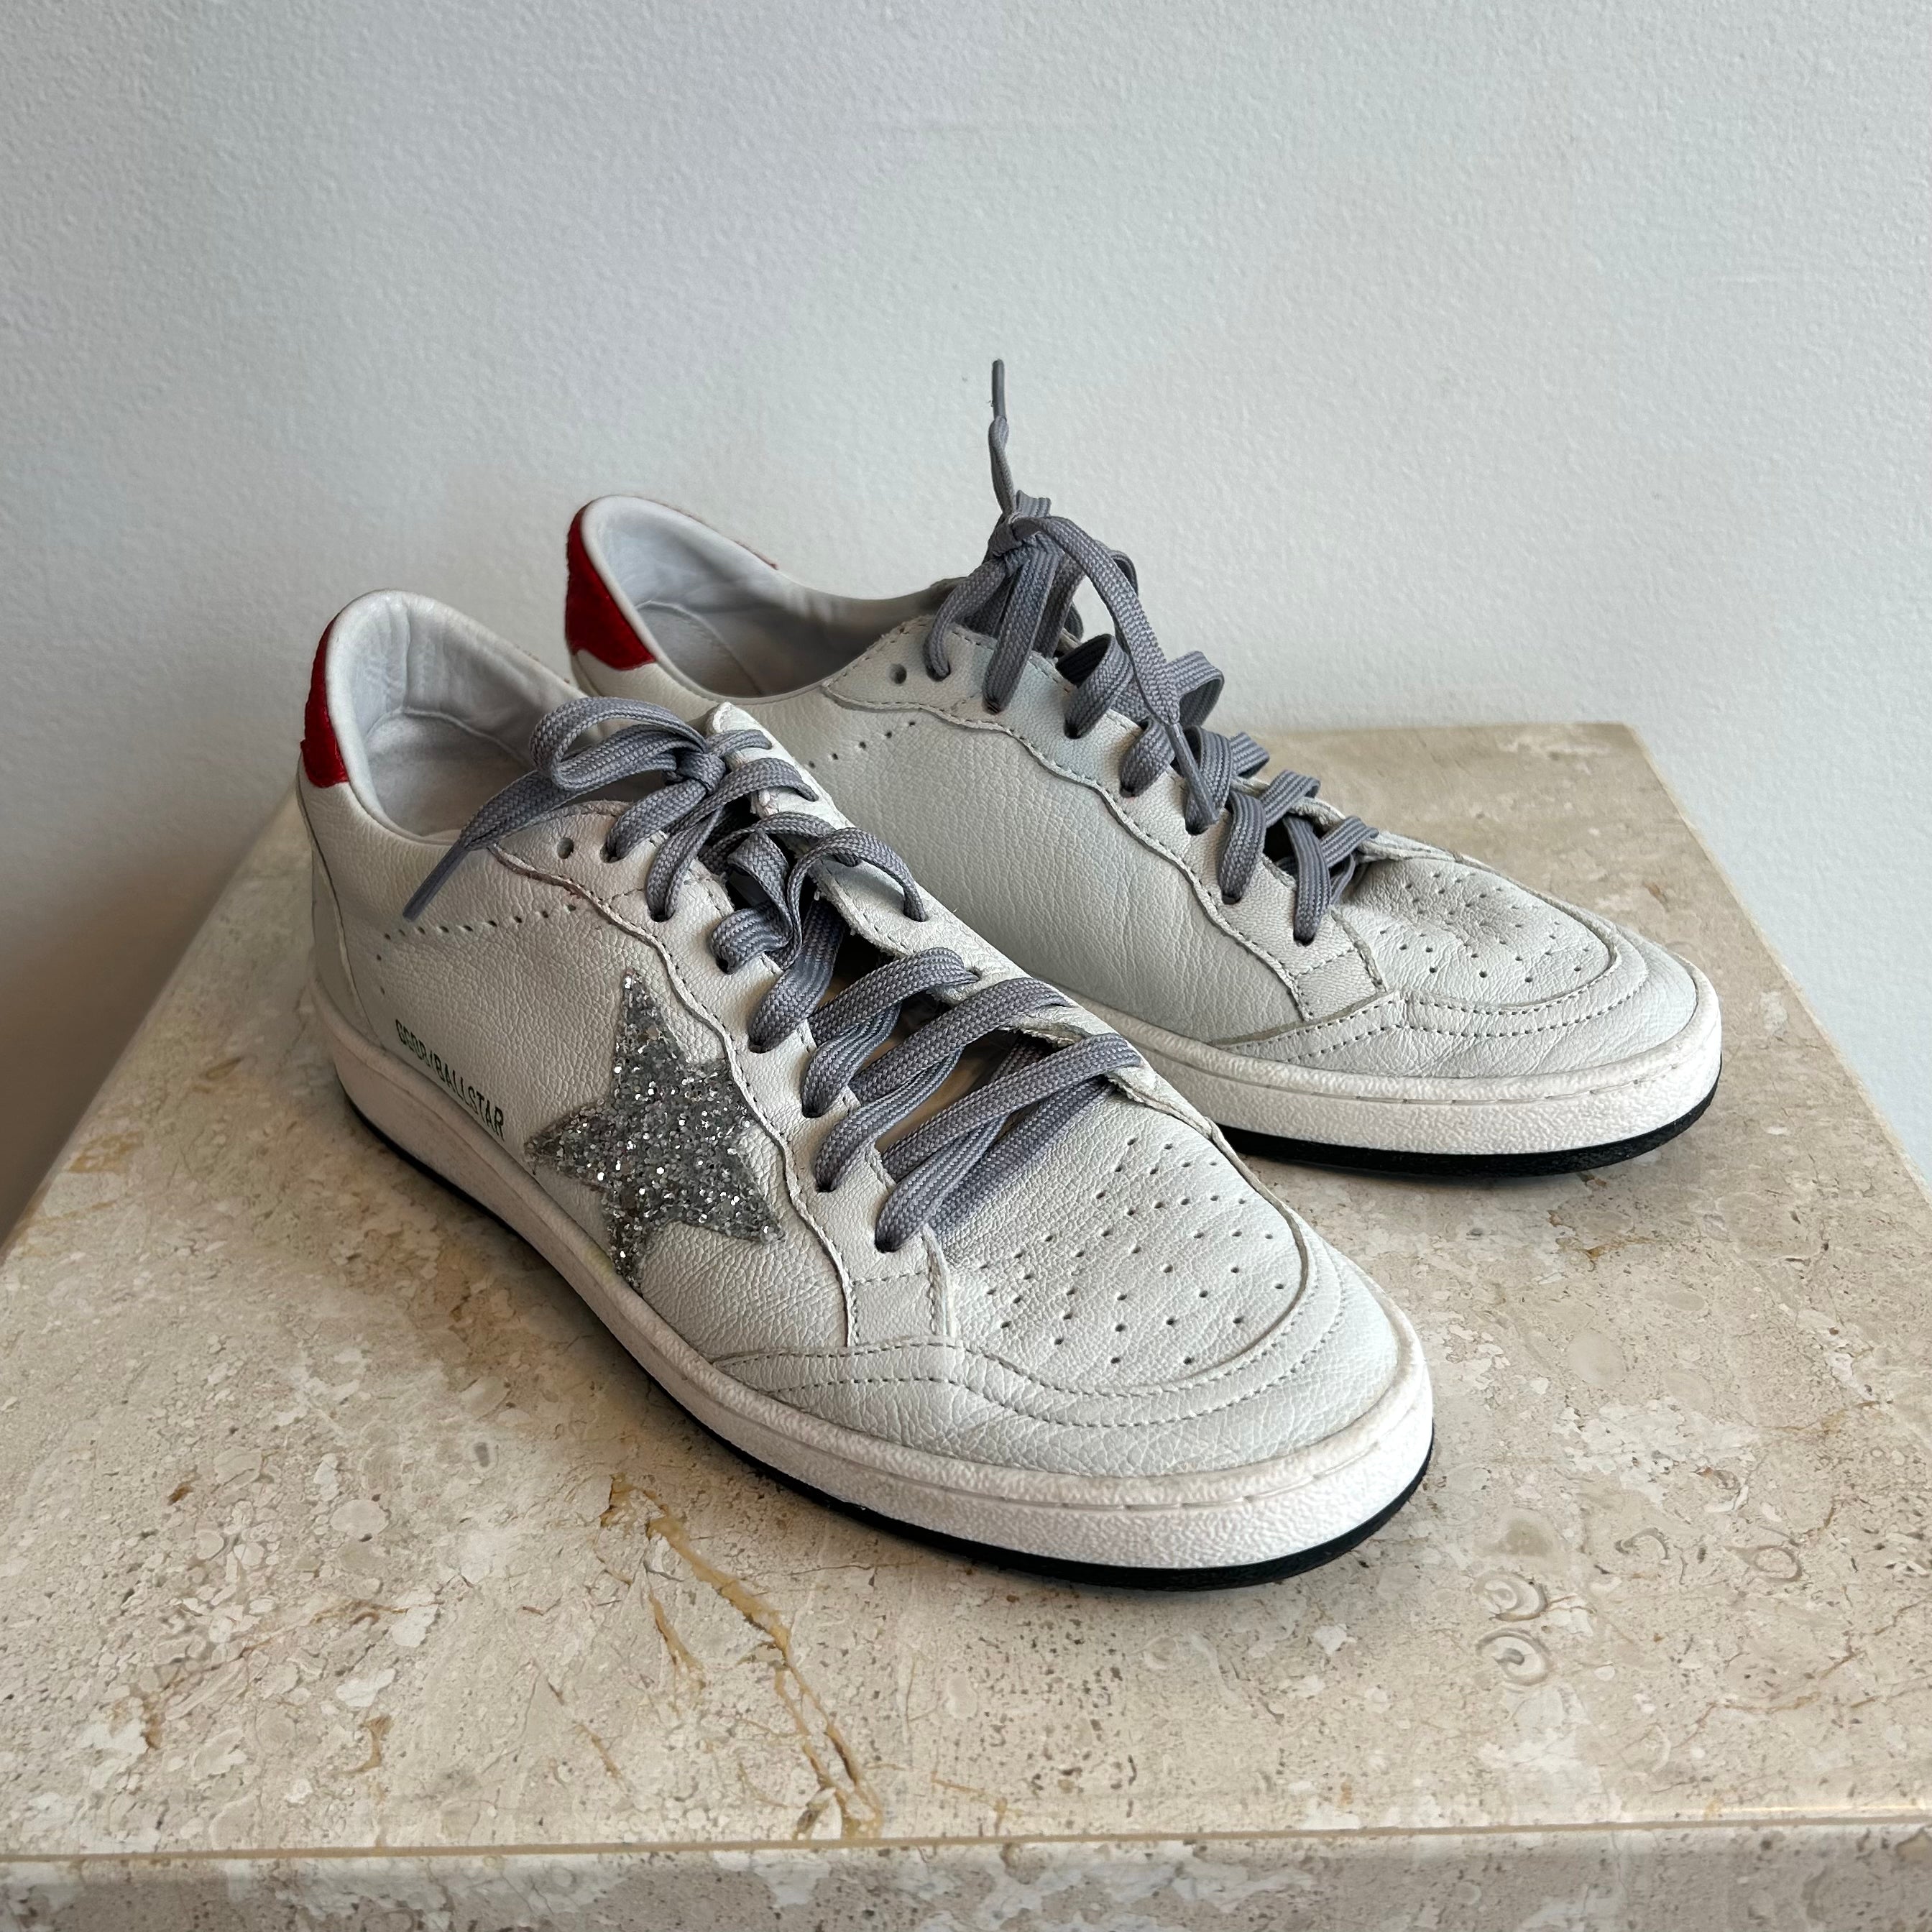 Pre-Owned GOLDEN GOOSE GGDB Ball Star Low Top Sneaker - Size 38